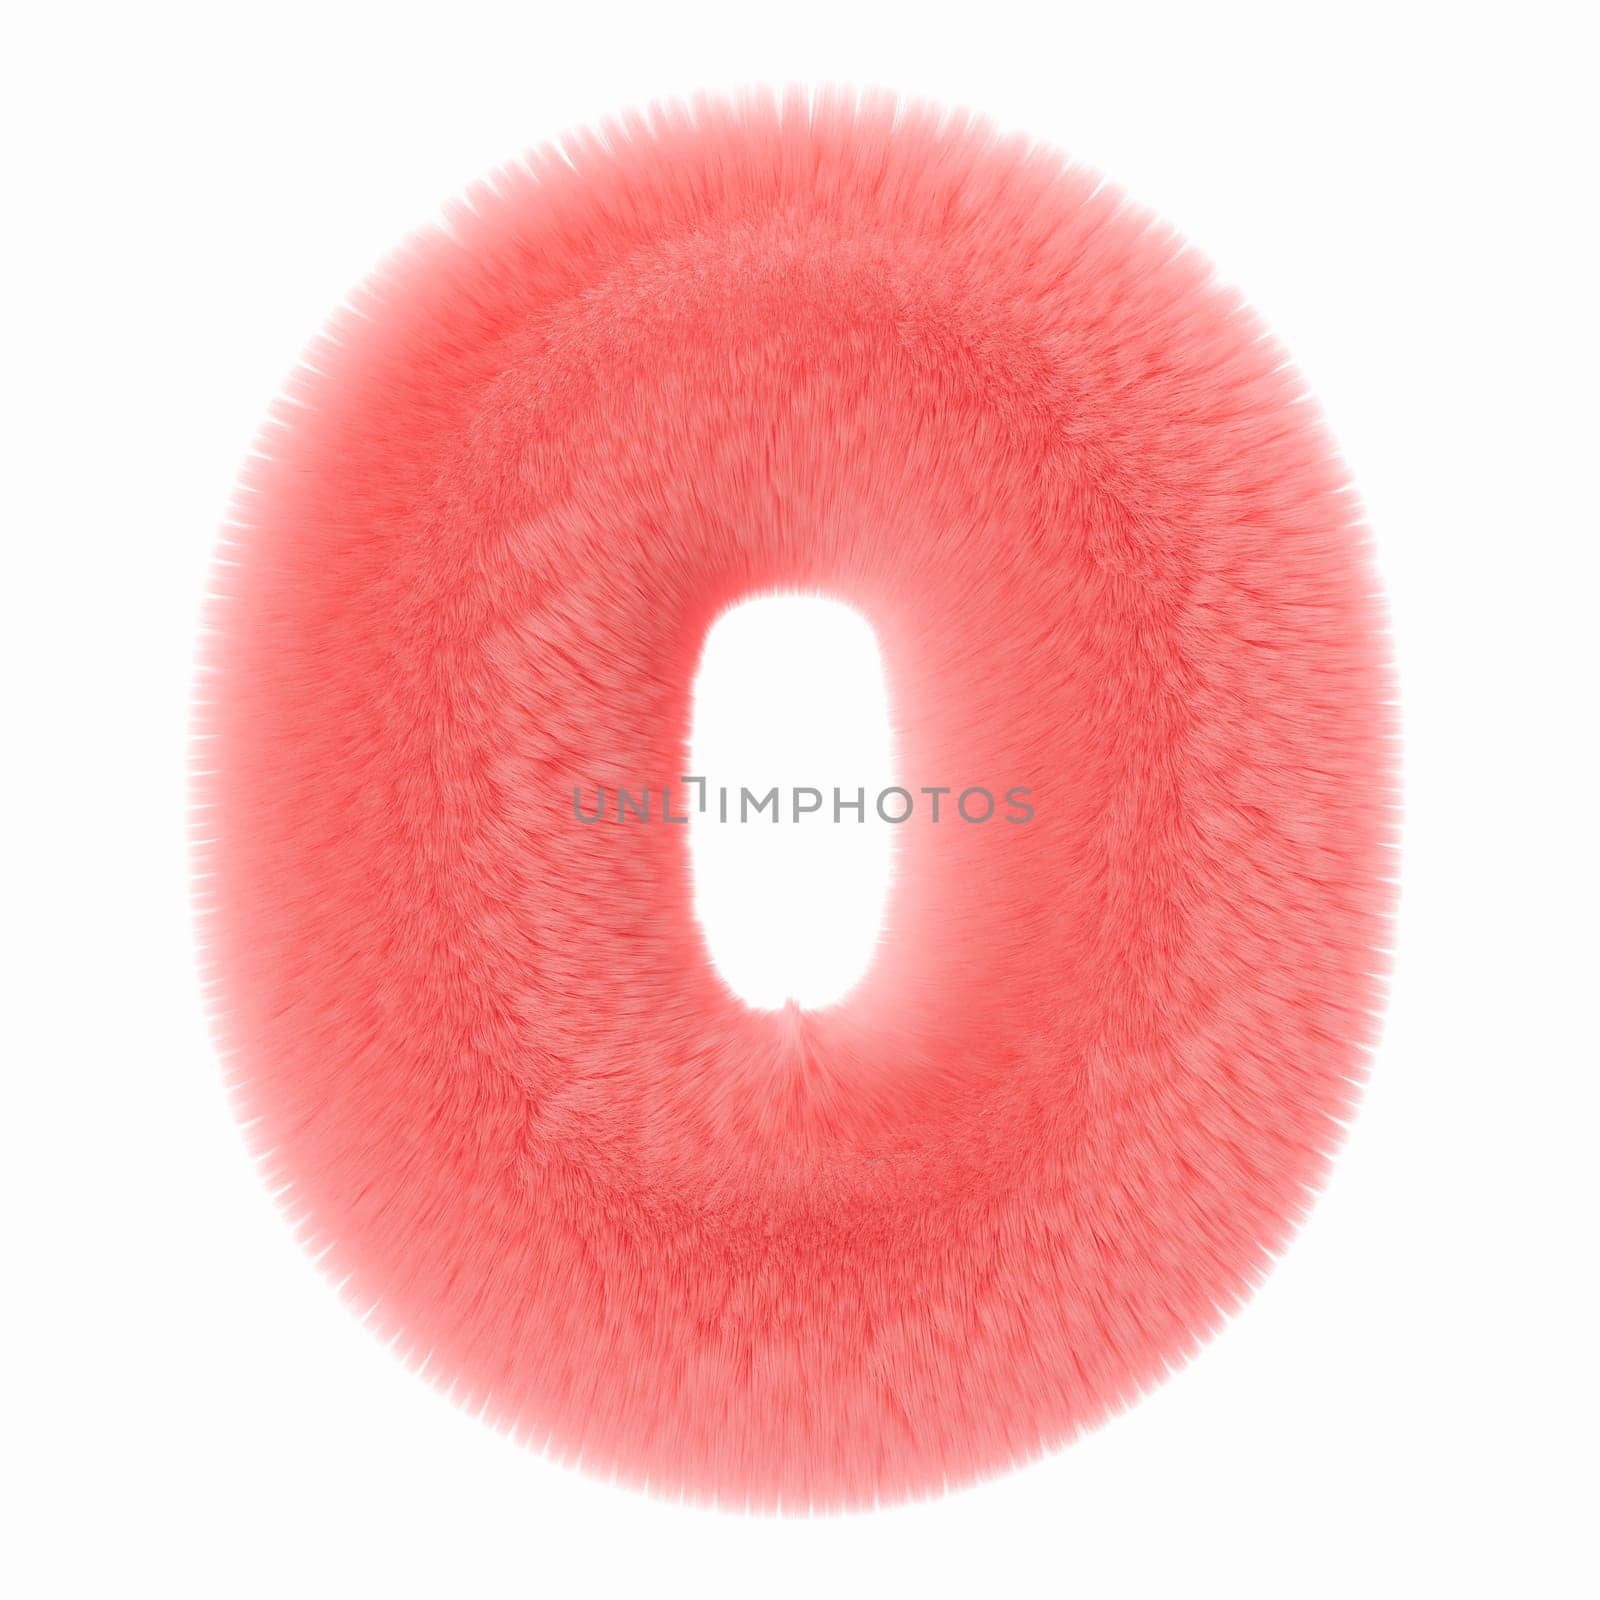 Pink and fluffy 3D number zero, isolated on white background. Furry, soft and hairy symbol 0. Trendy, cute design element. Cut out object. 3D rendering